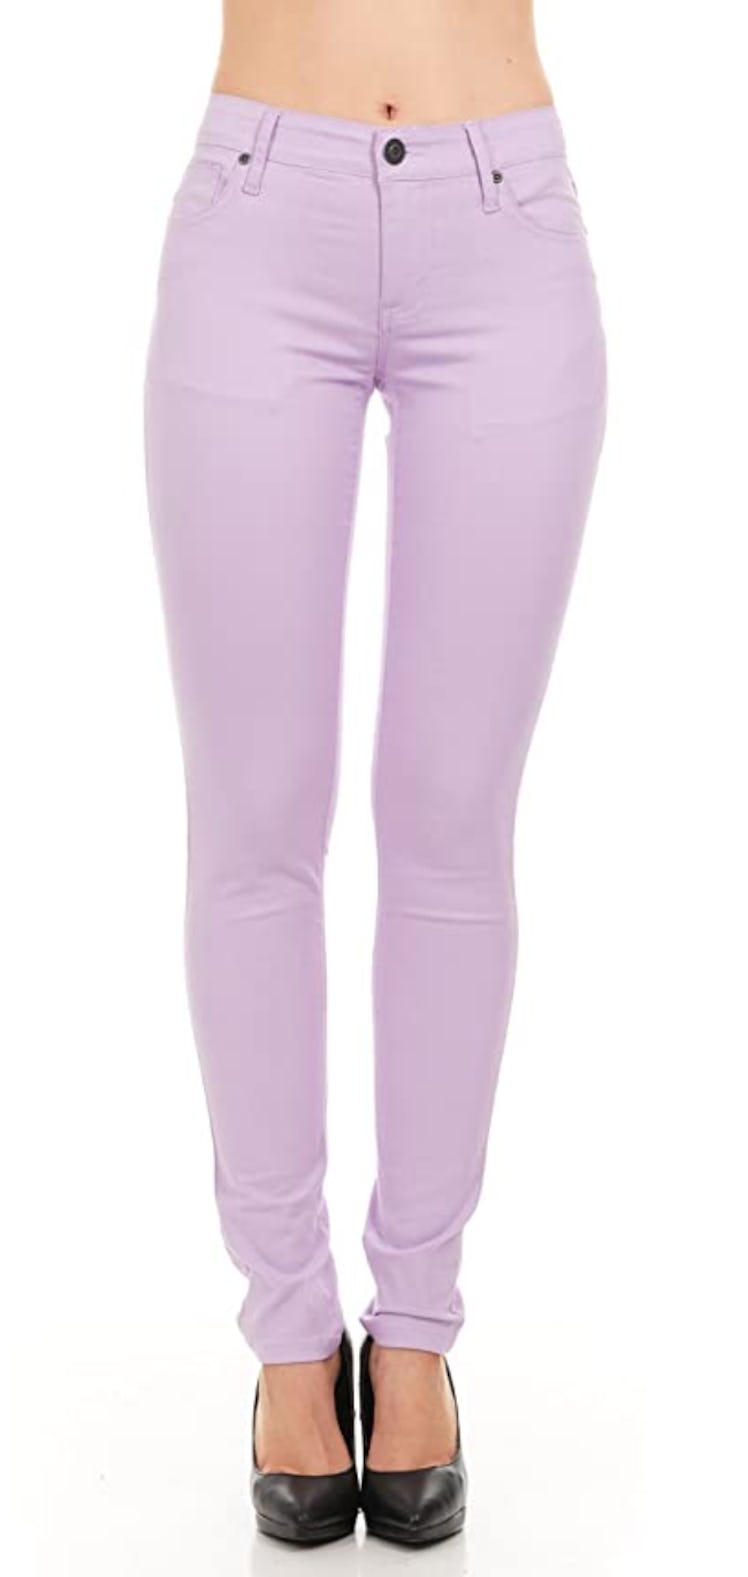 Chino Stretch Lavender Jeans